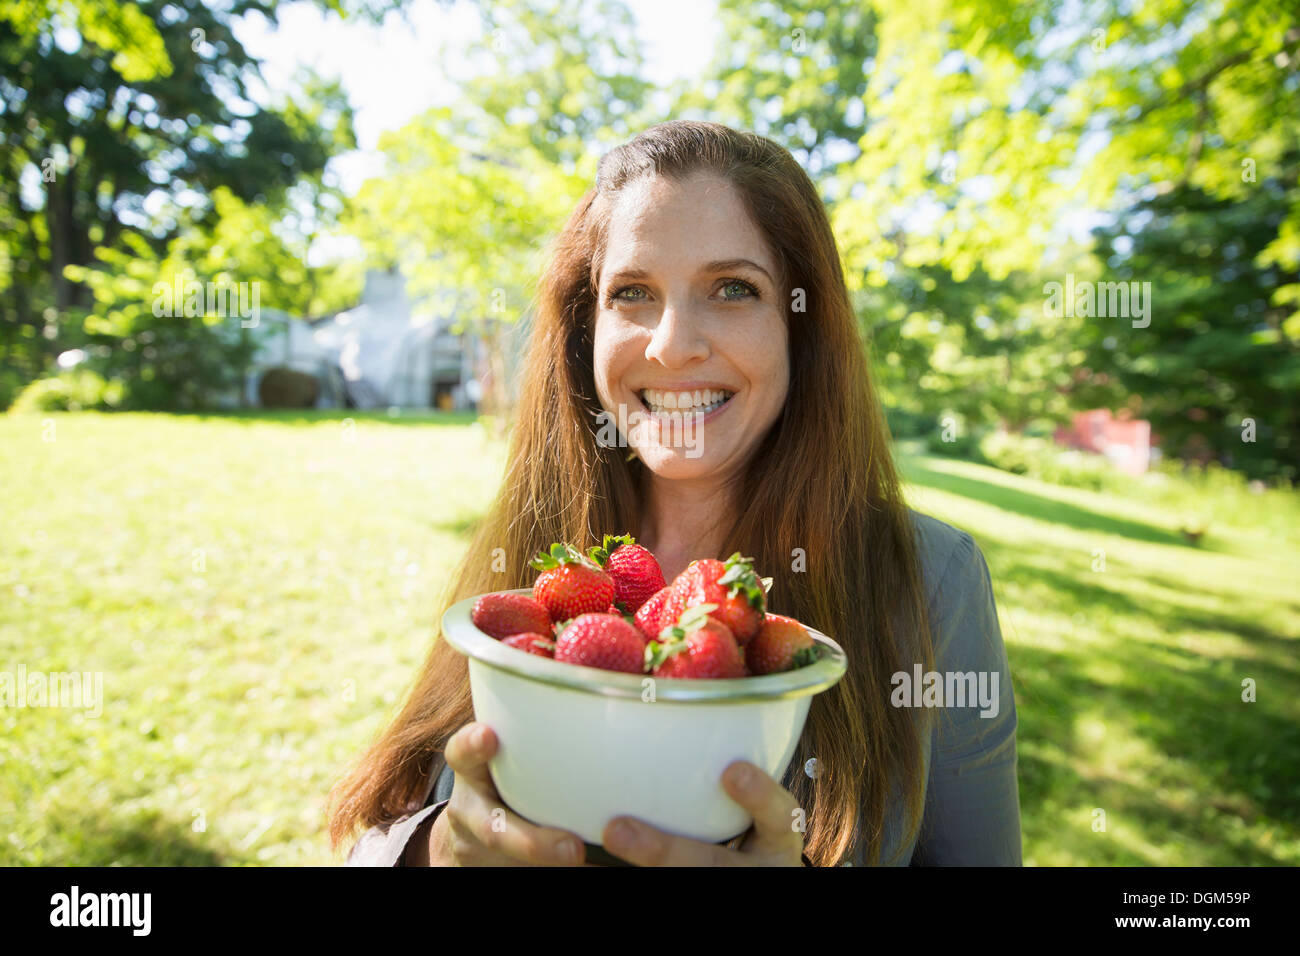 On the farm. A woman carrying a bowl of organic fresh picked strawberries. Stock Photo